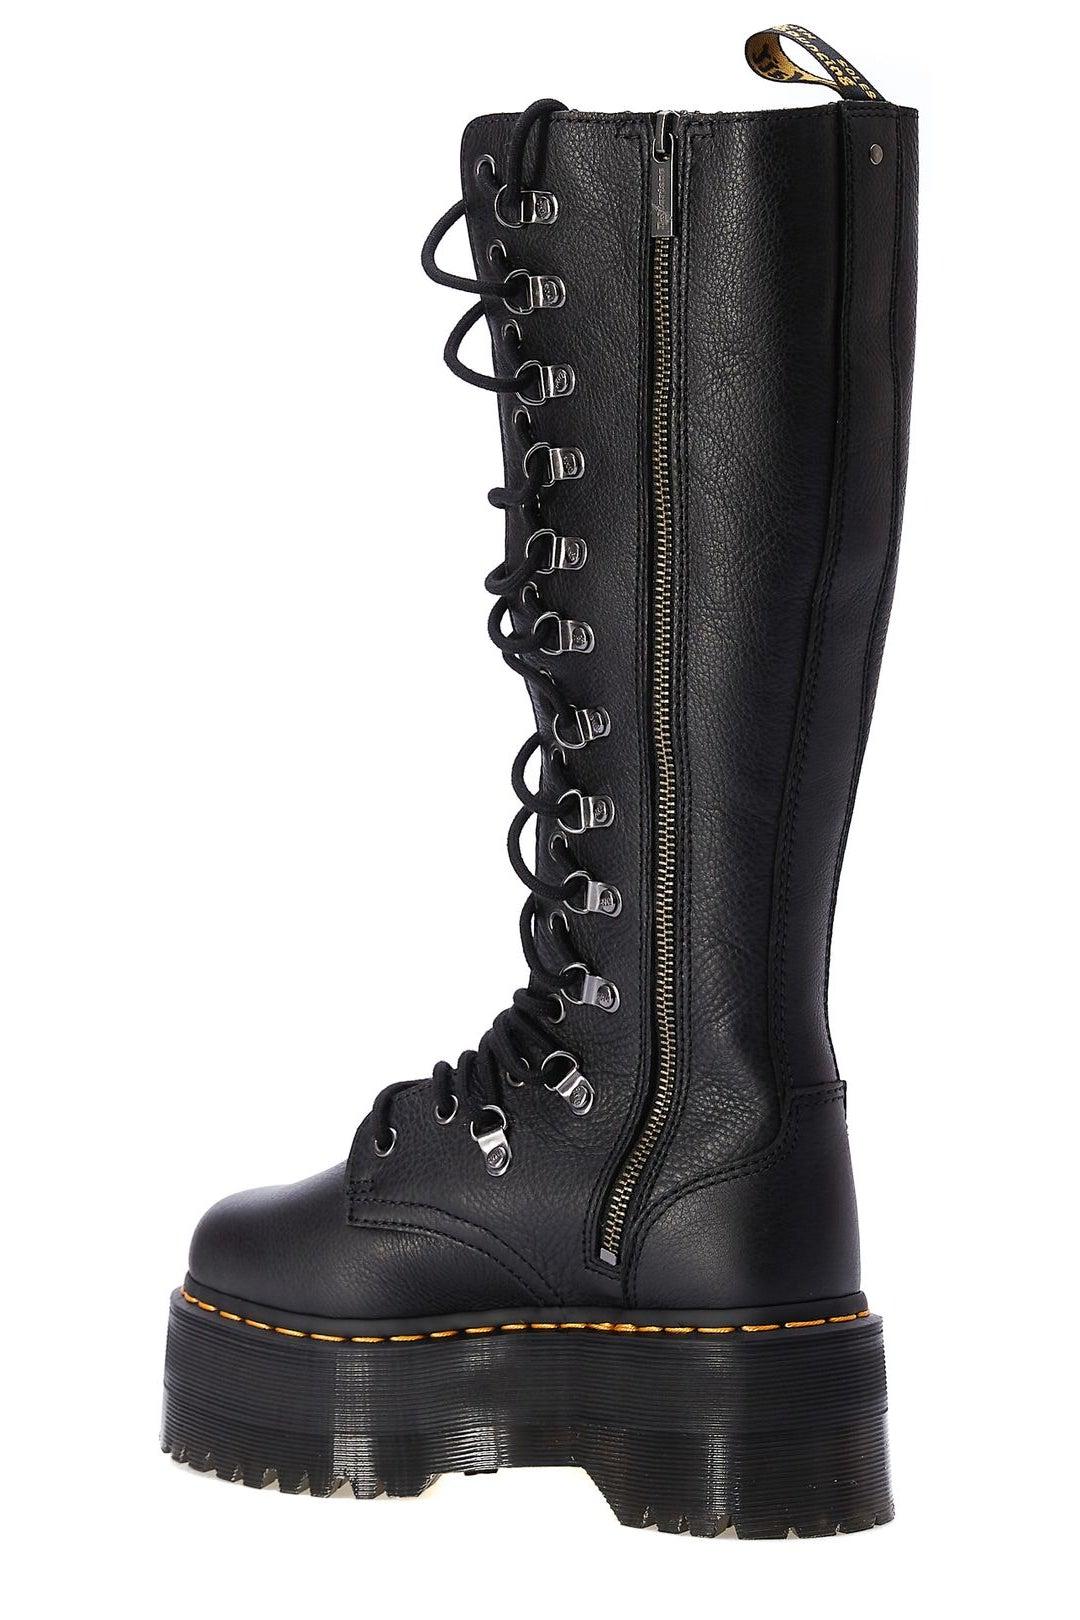 Dr. Martens Leather 1b60 Max Hardware Knee-high Boots in Black | Lyst